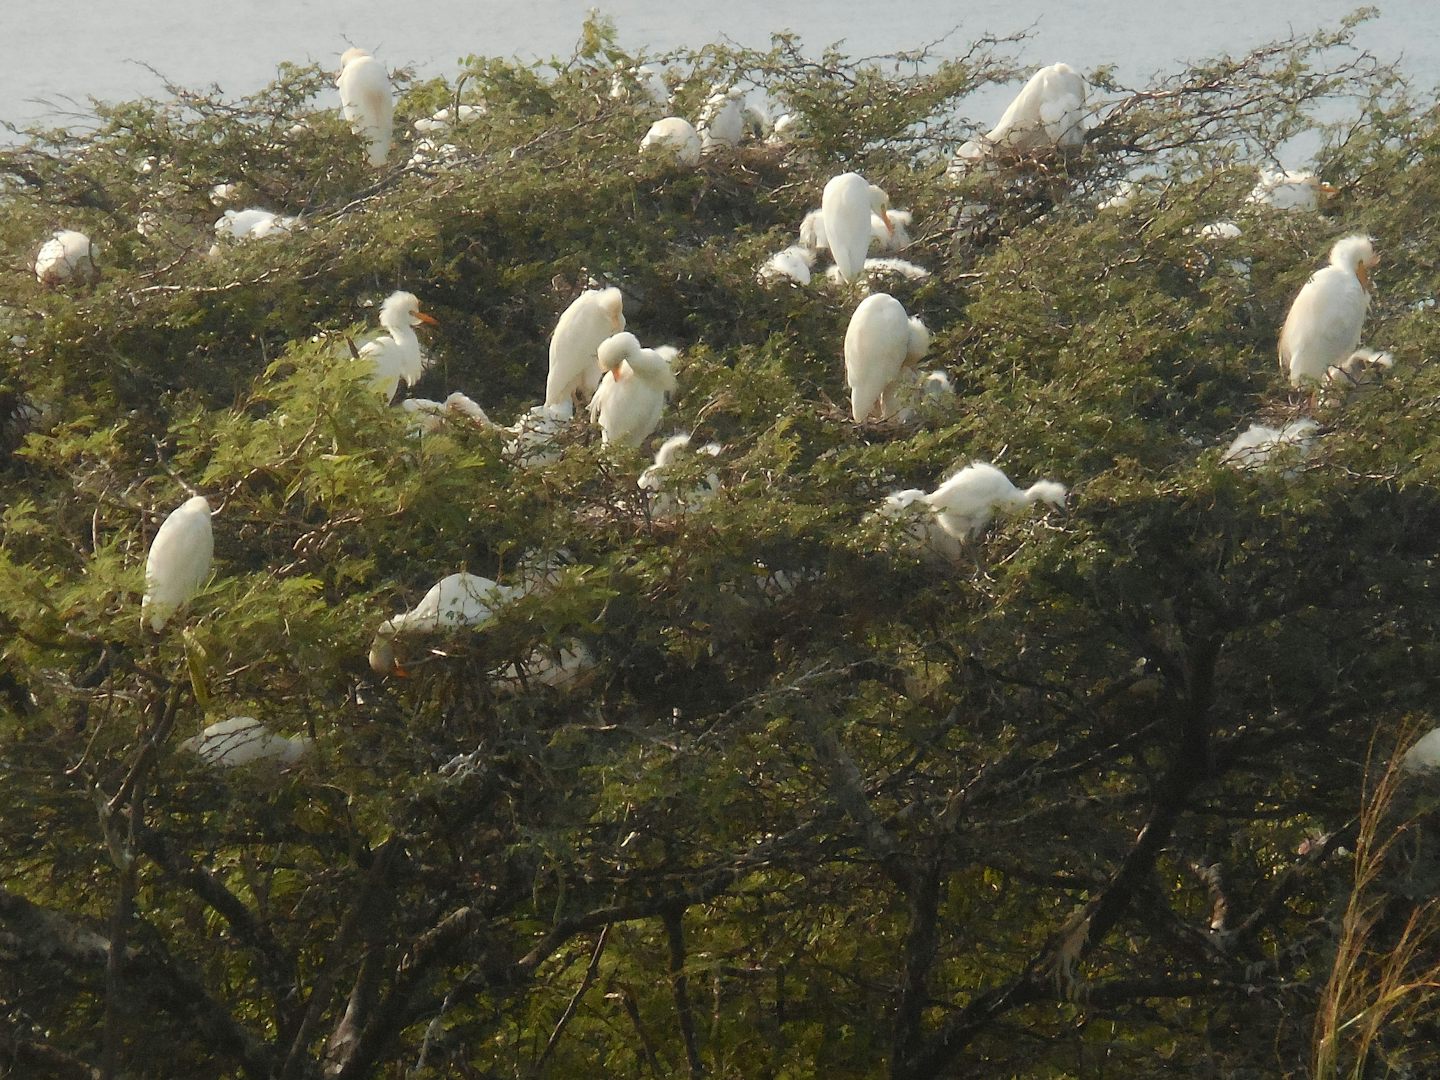 Thrilling white migratory birds filling the trees in St. Kitts on their way